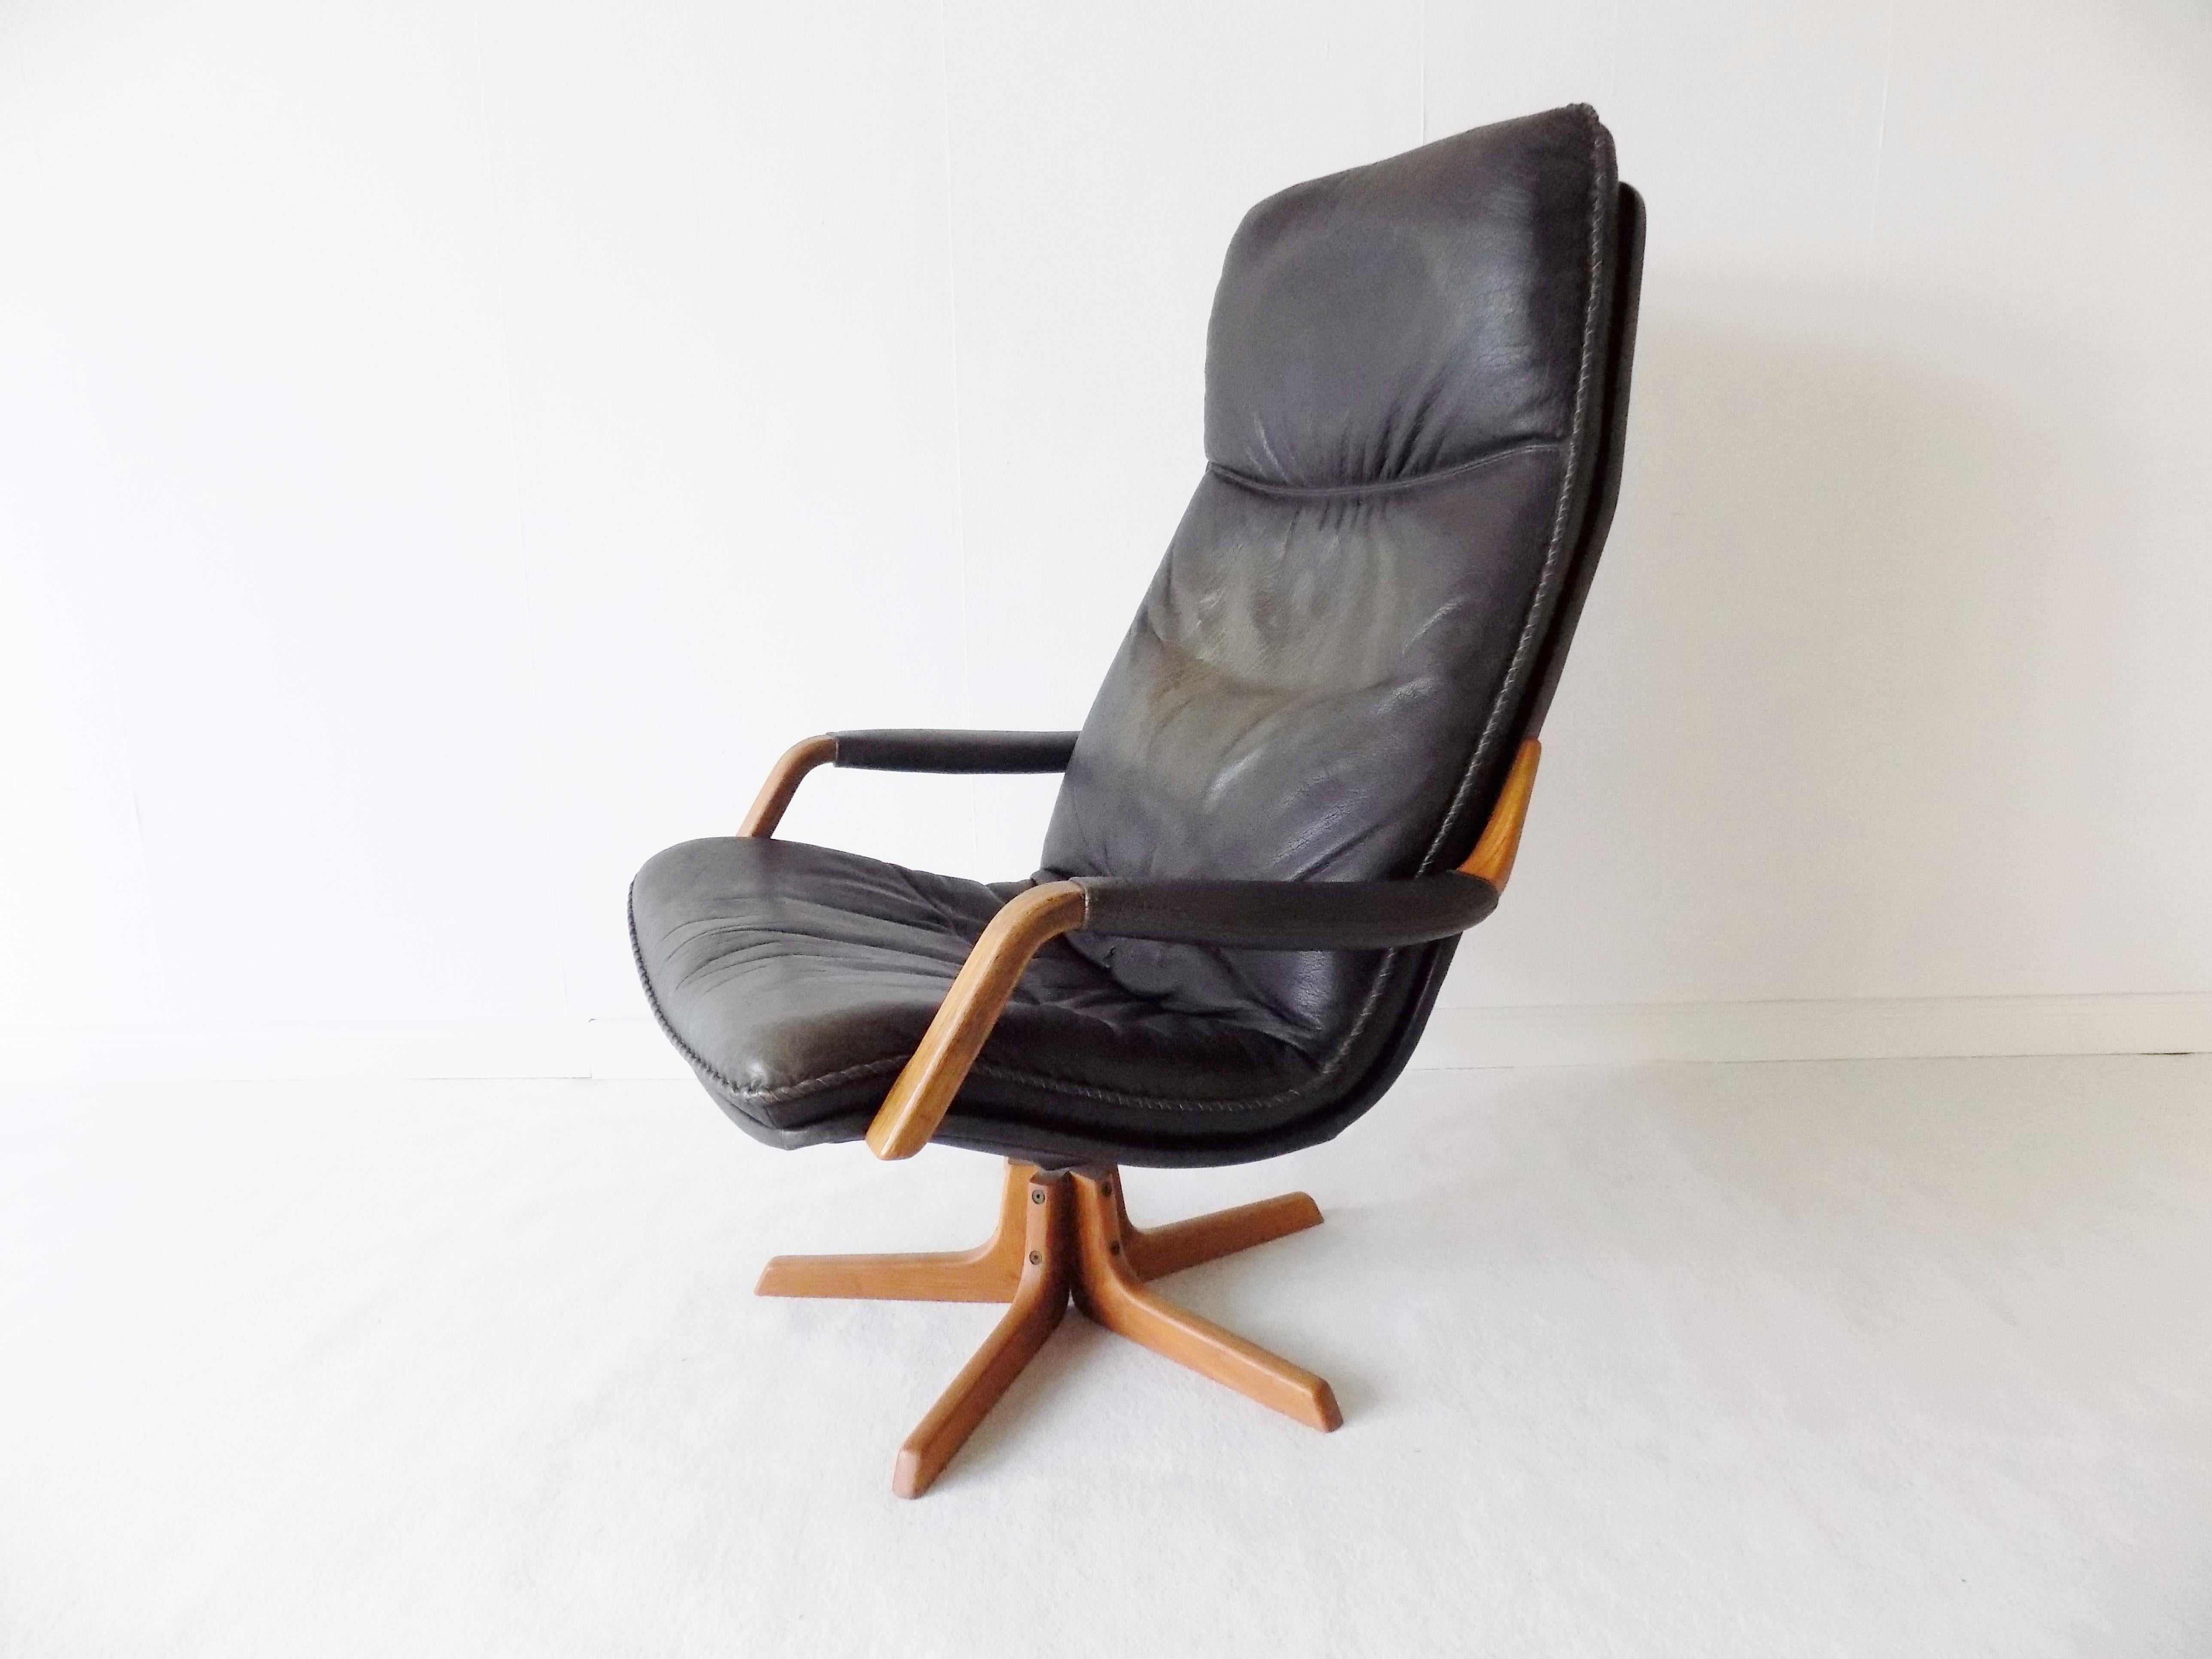 Berg Furniture Danish Leather Lounge Chair with Ottoman, Mid-Century Modern In Good Condition For Sale In Ludwigslust, Mecklenburg-Vorpommern